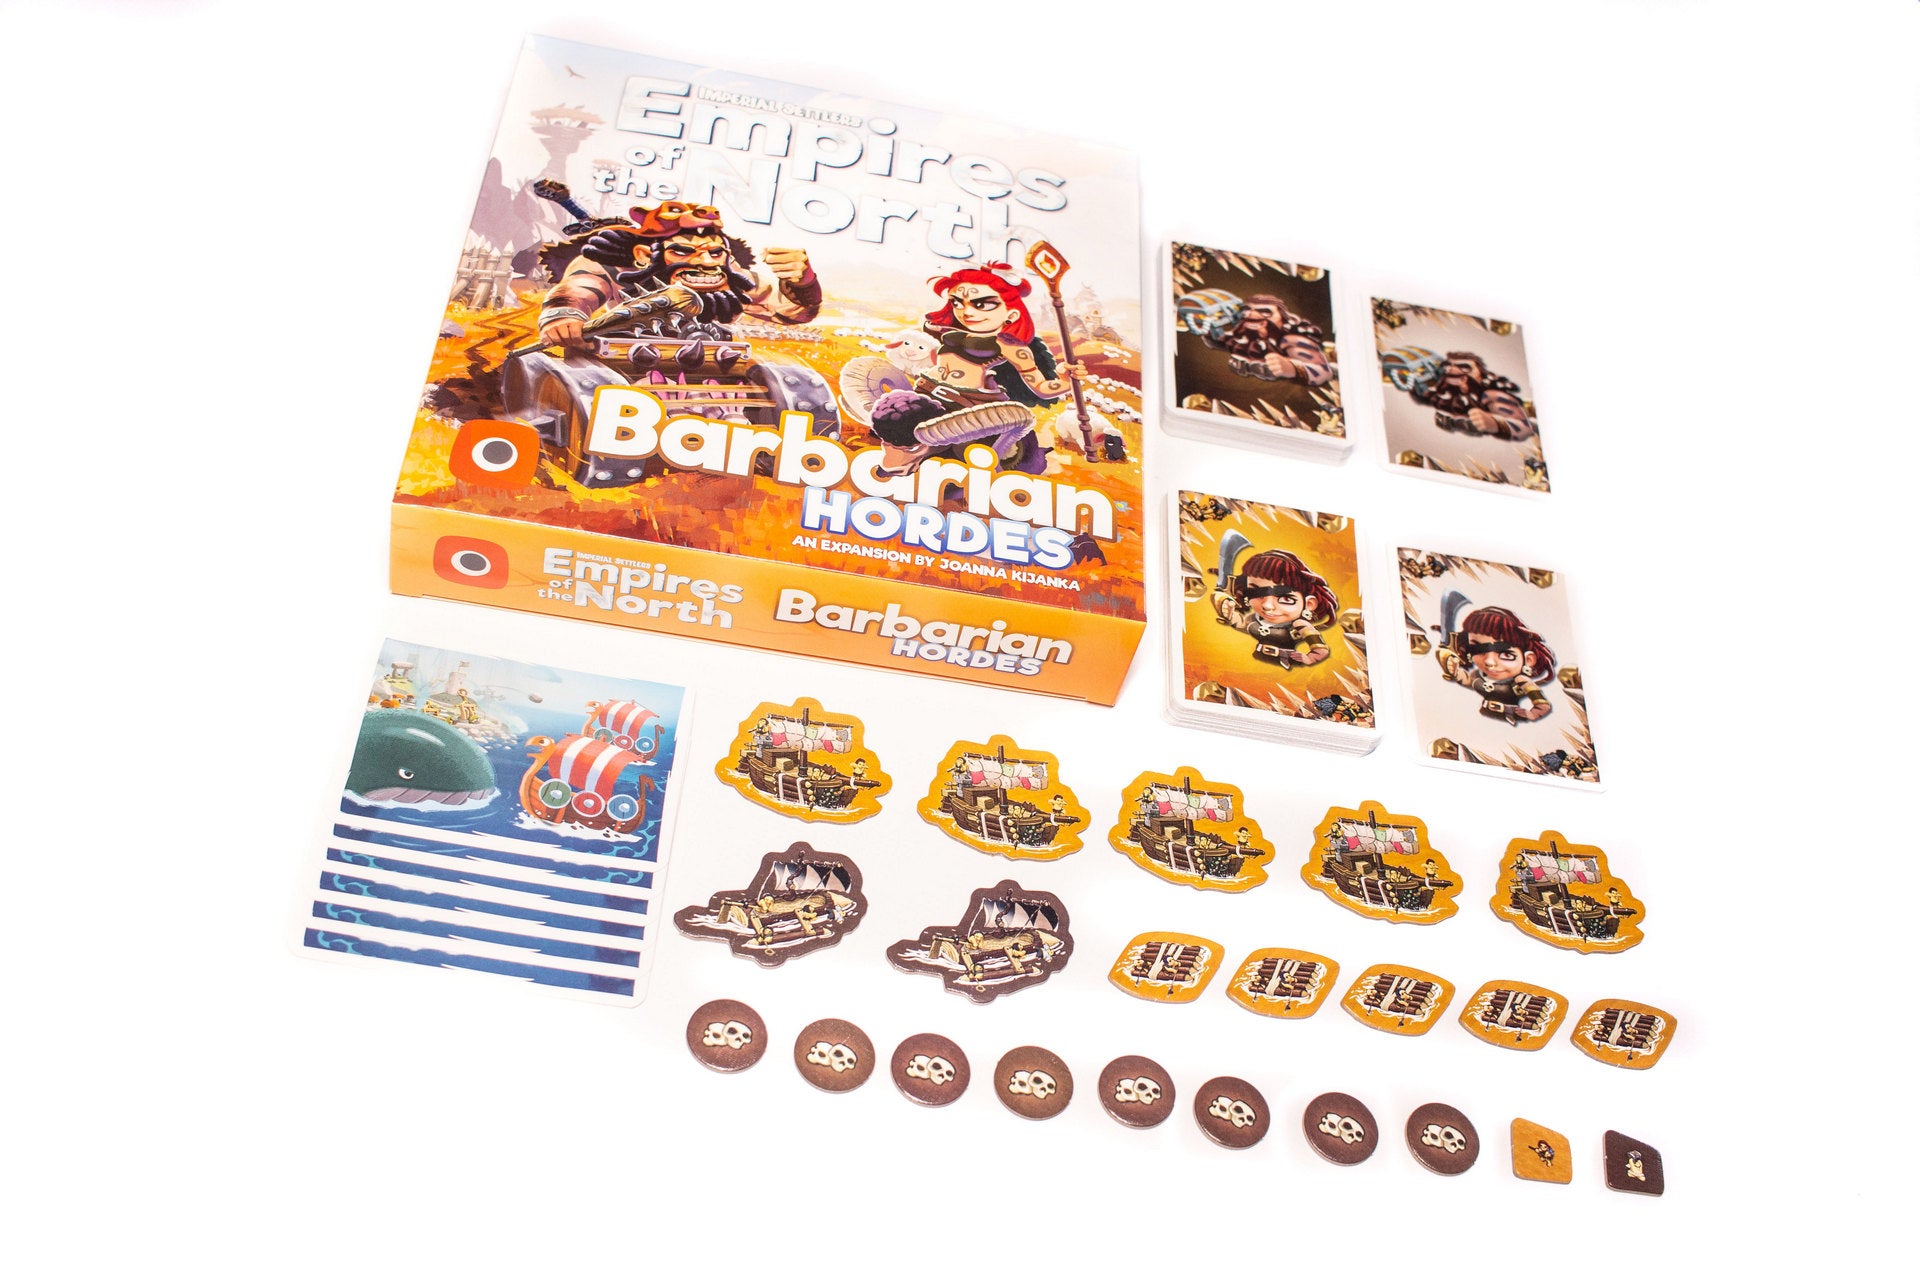 Empires of the North: Barbarian Hordes Expansion - Bards & Cards